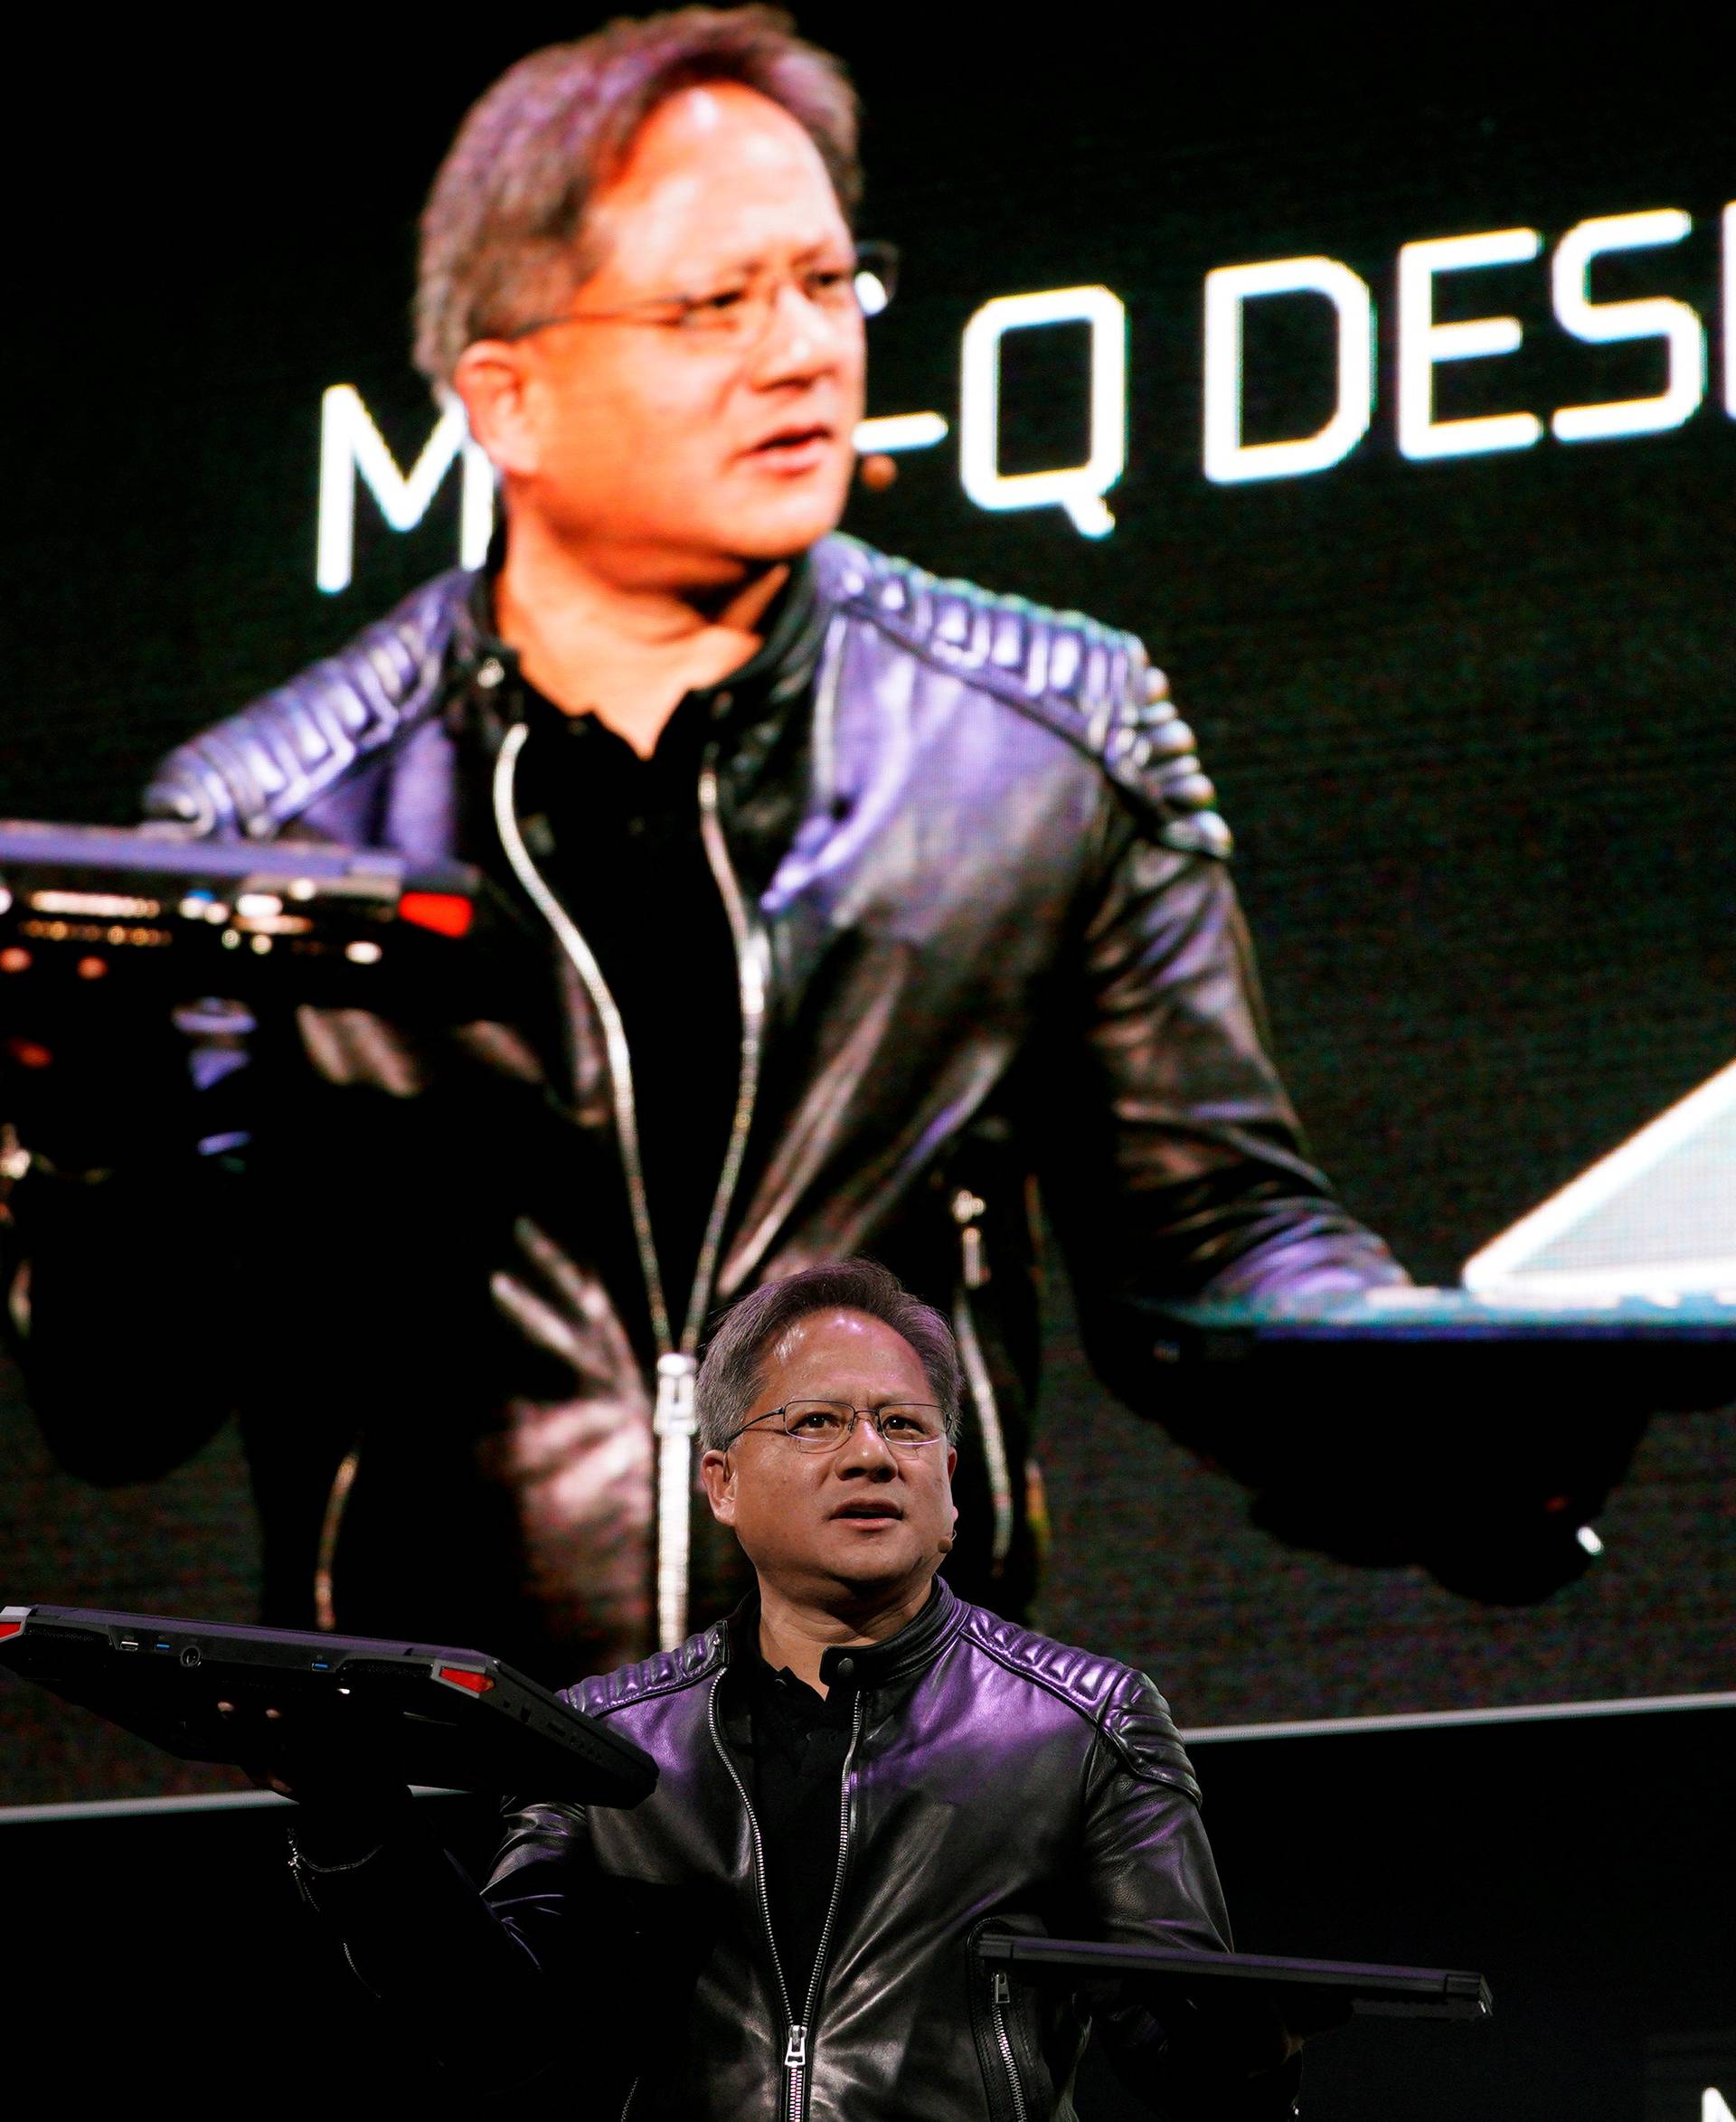 Jensen Huang, CEO of Nvidia, shows the old and new Max-Q laptops at his keynote address at CES in Las Vegas